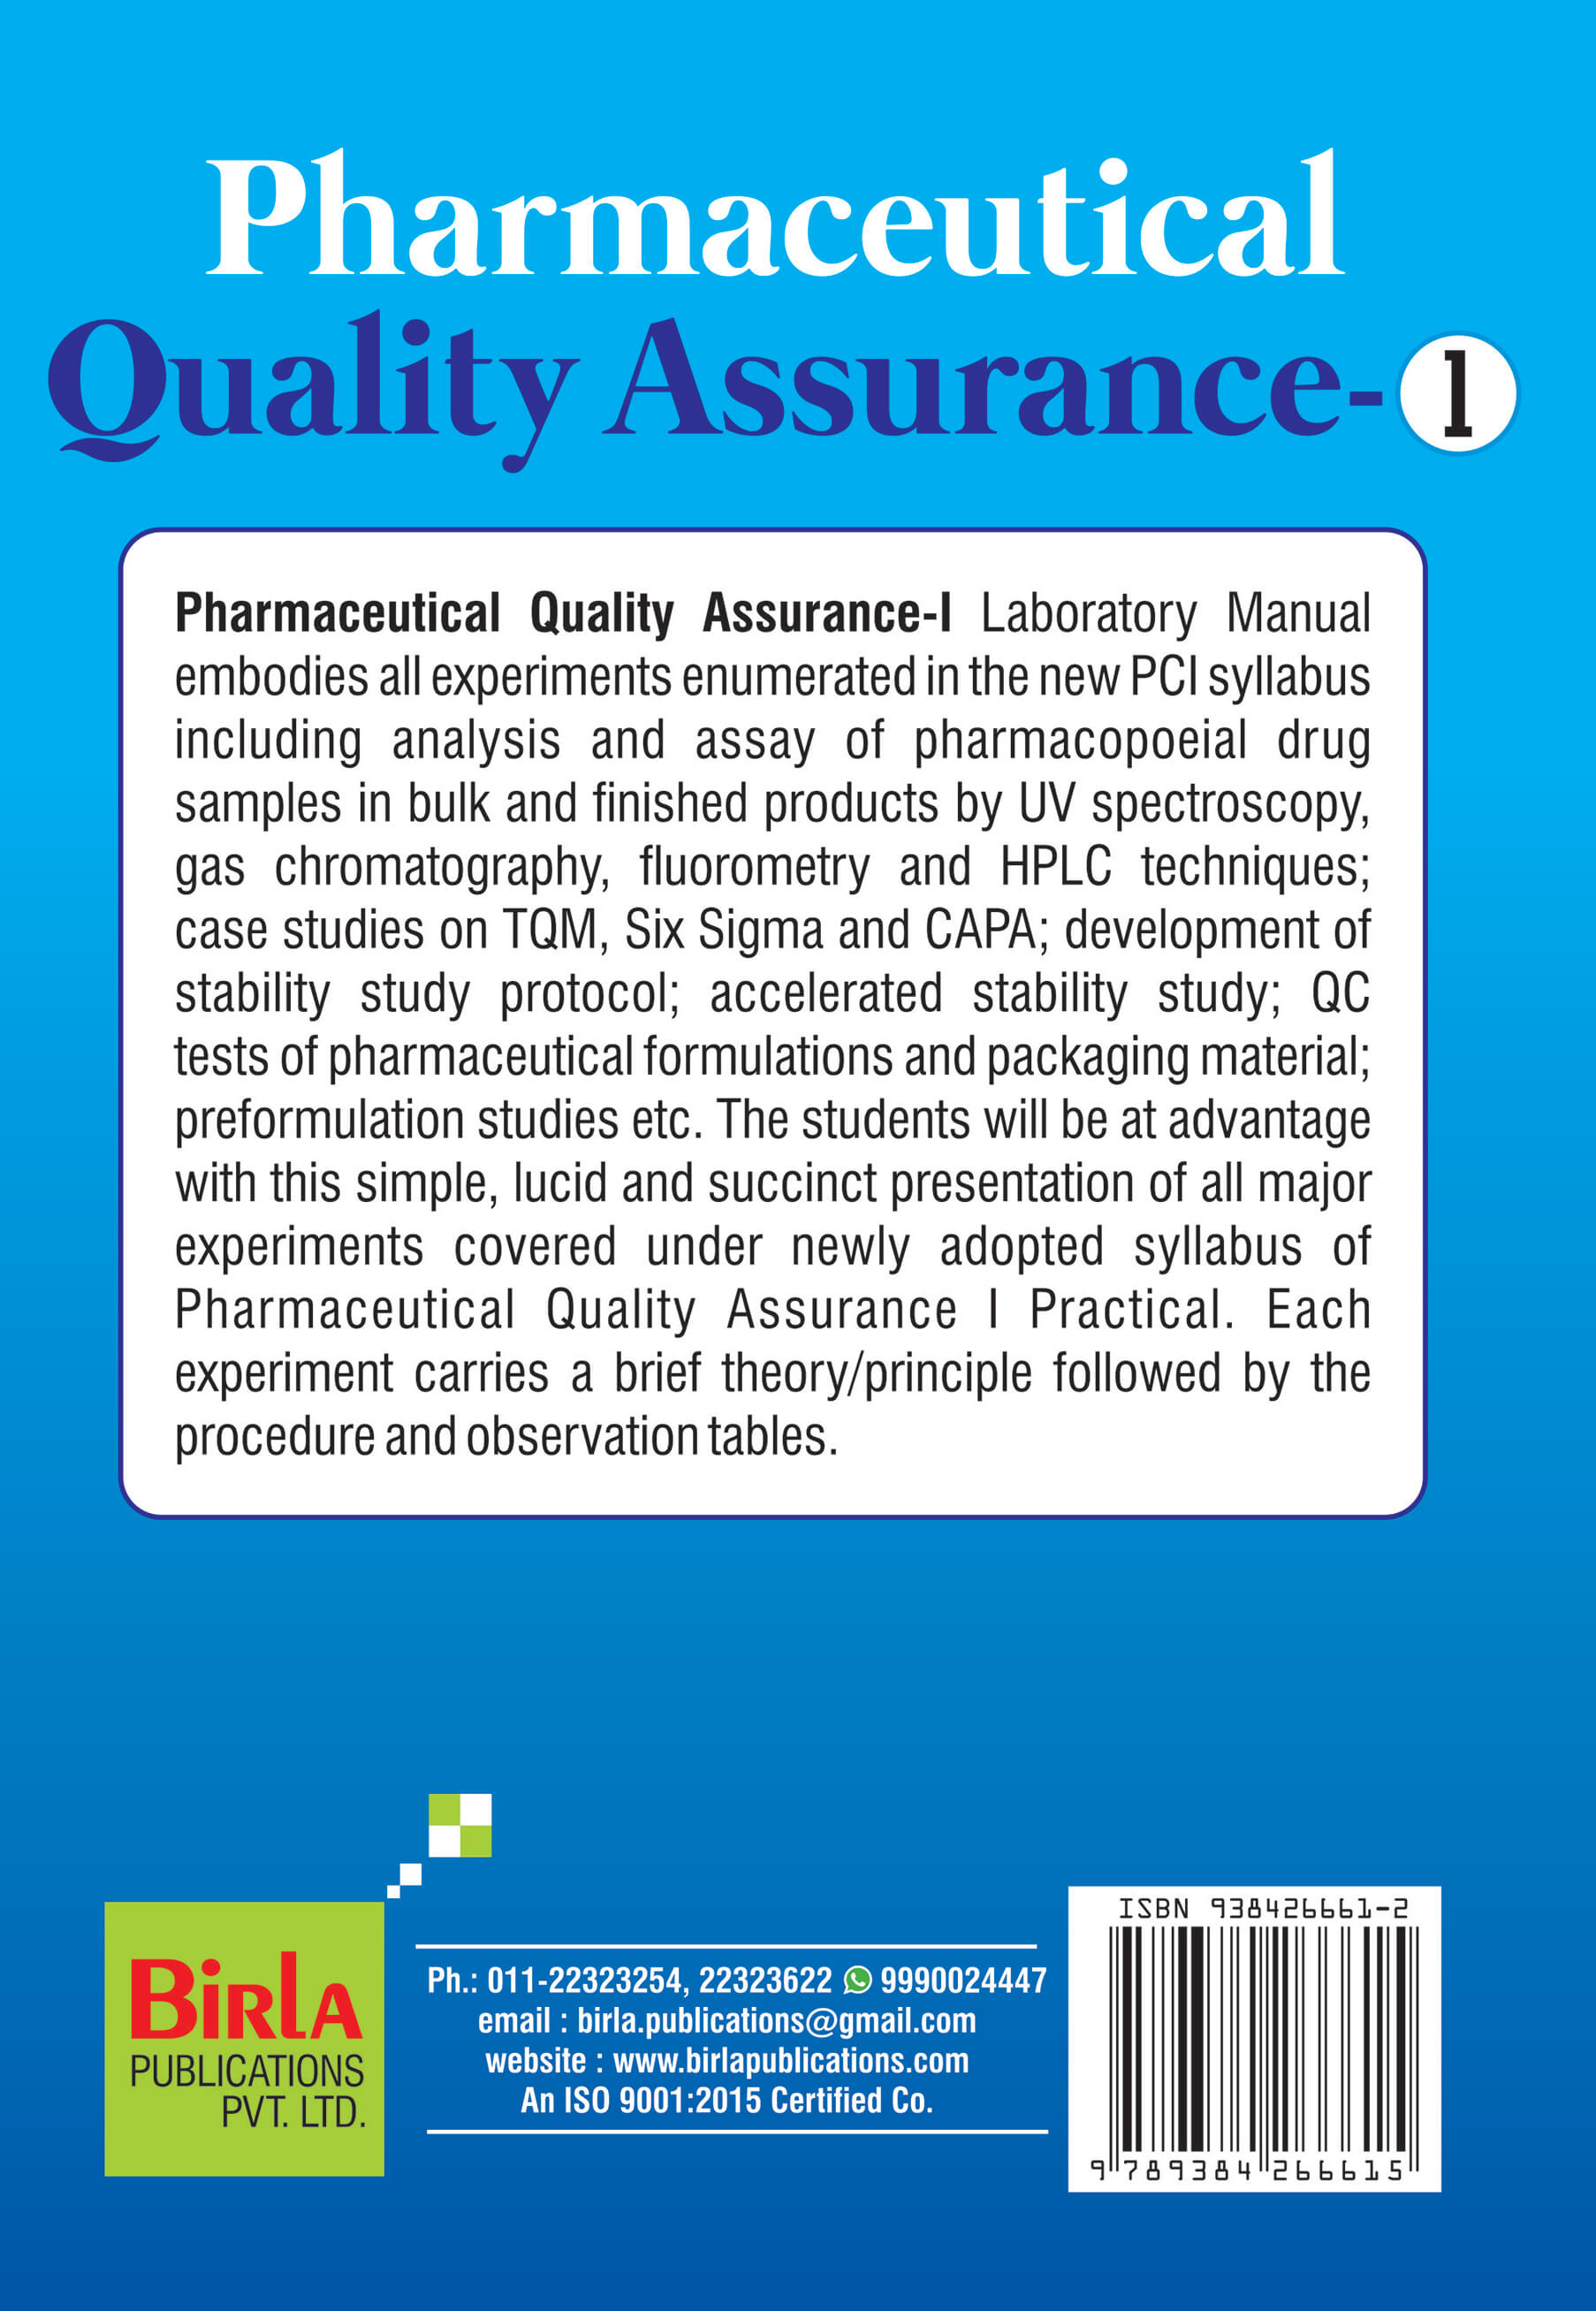 PHARMACEUTICAL QUALITY ASSURANCE - 1 Practicals